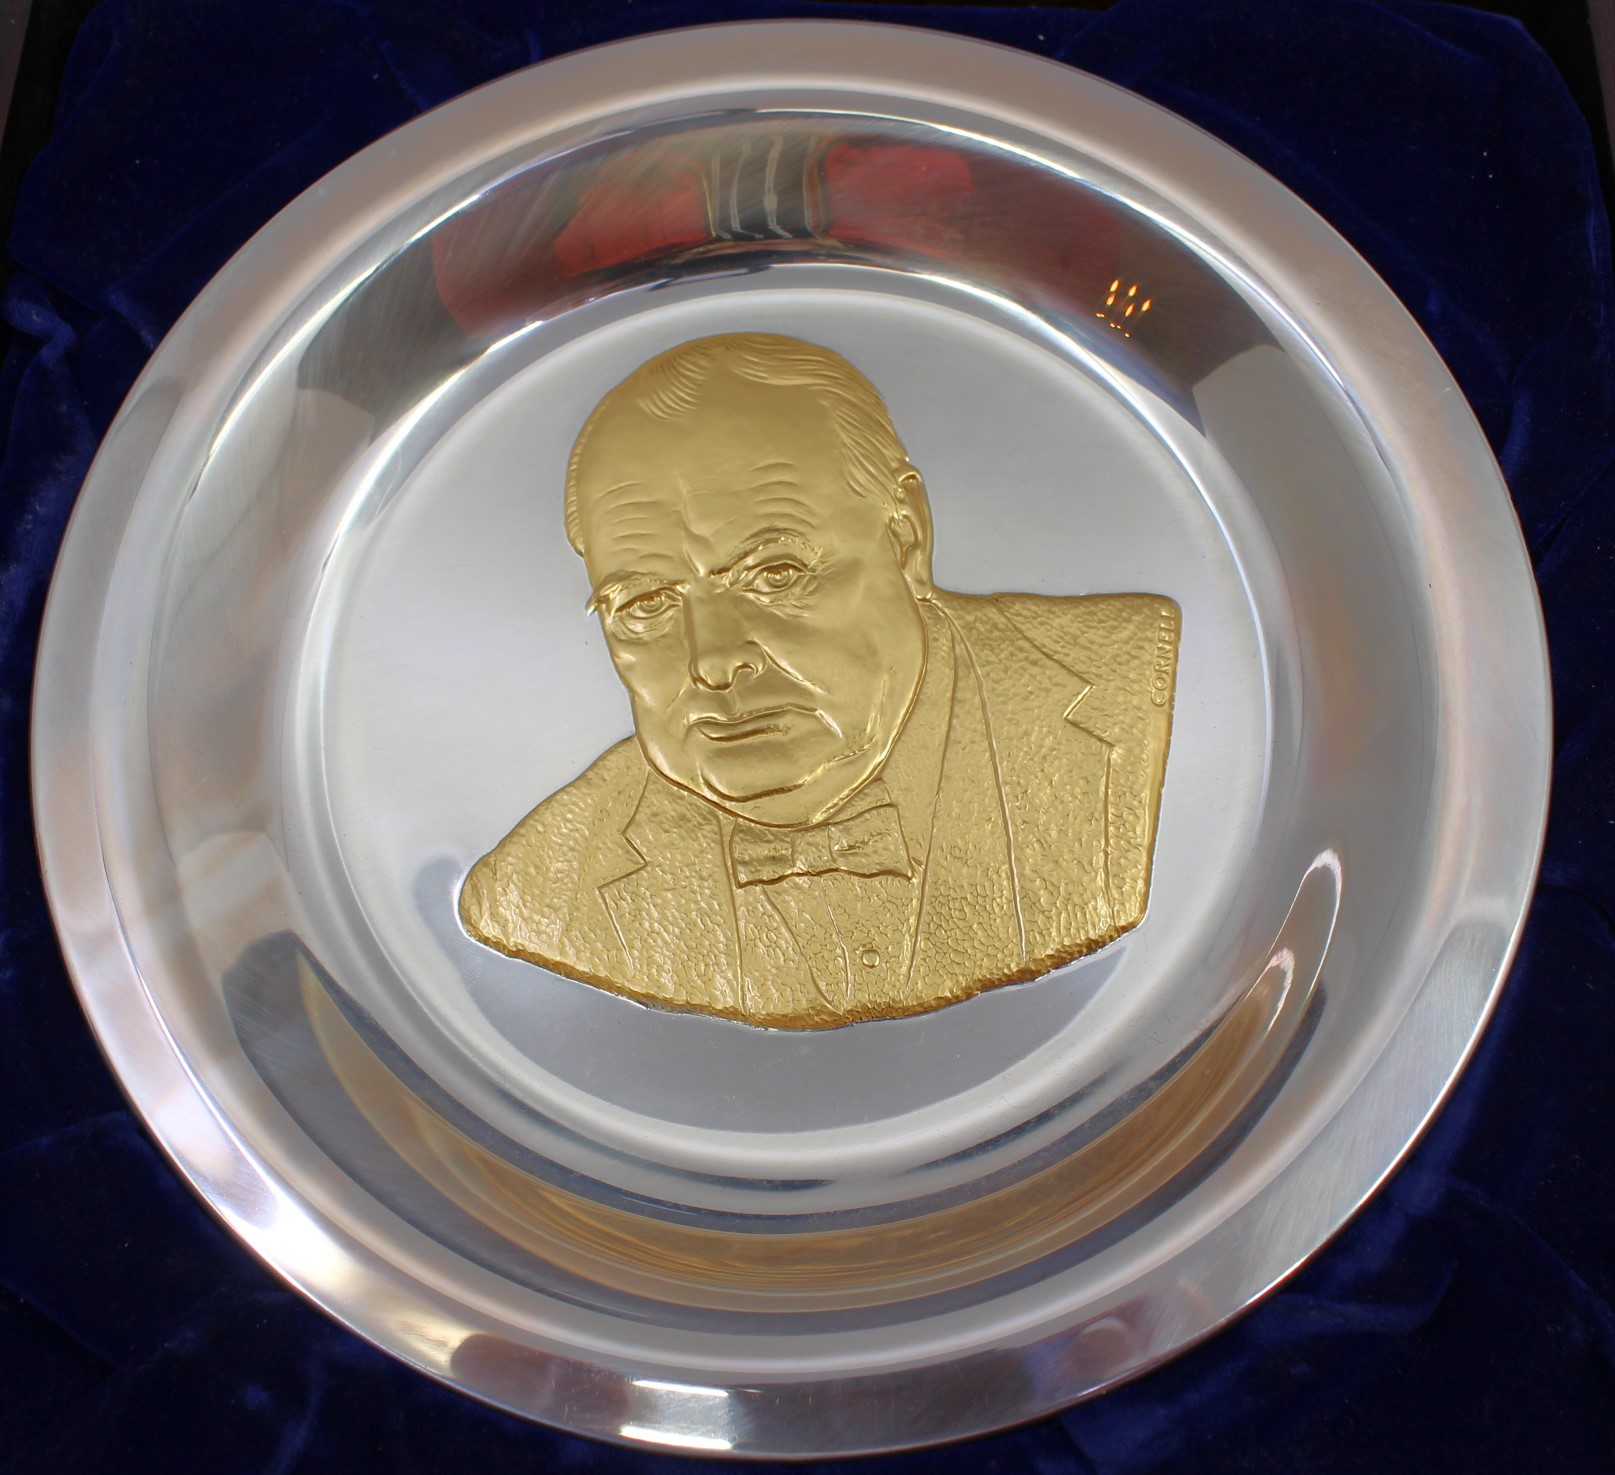 The Churchill Centenary Trust Plate 1974.  The plate is Gold on Sterling Silver Plate.  It is a - Image 2 of 4